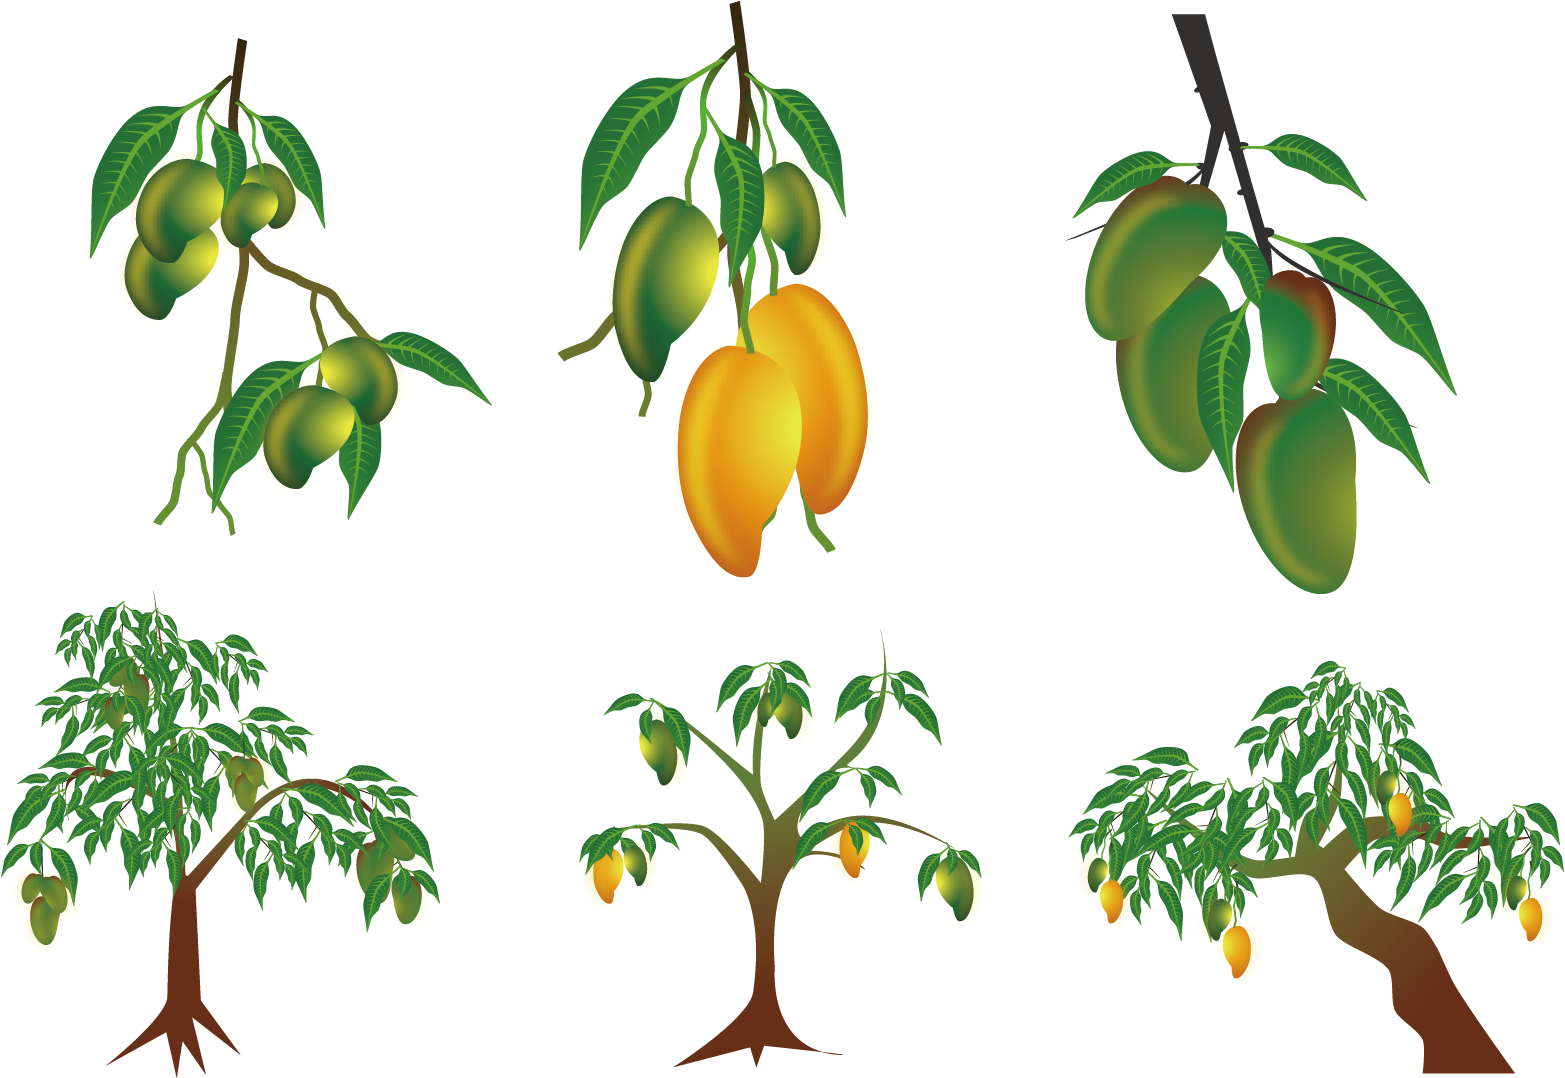 A Group Of Mangoes On A Tree